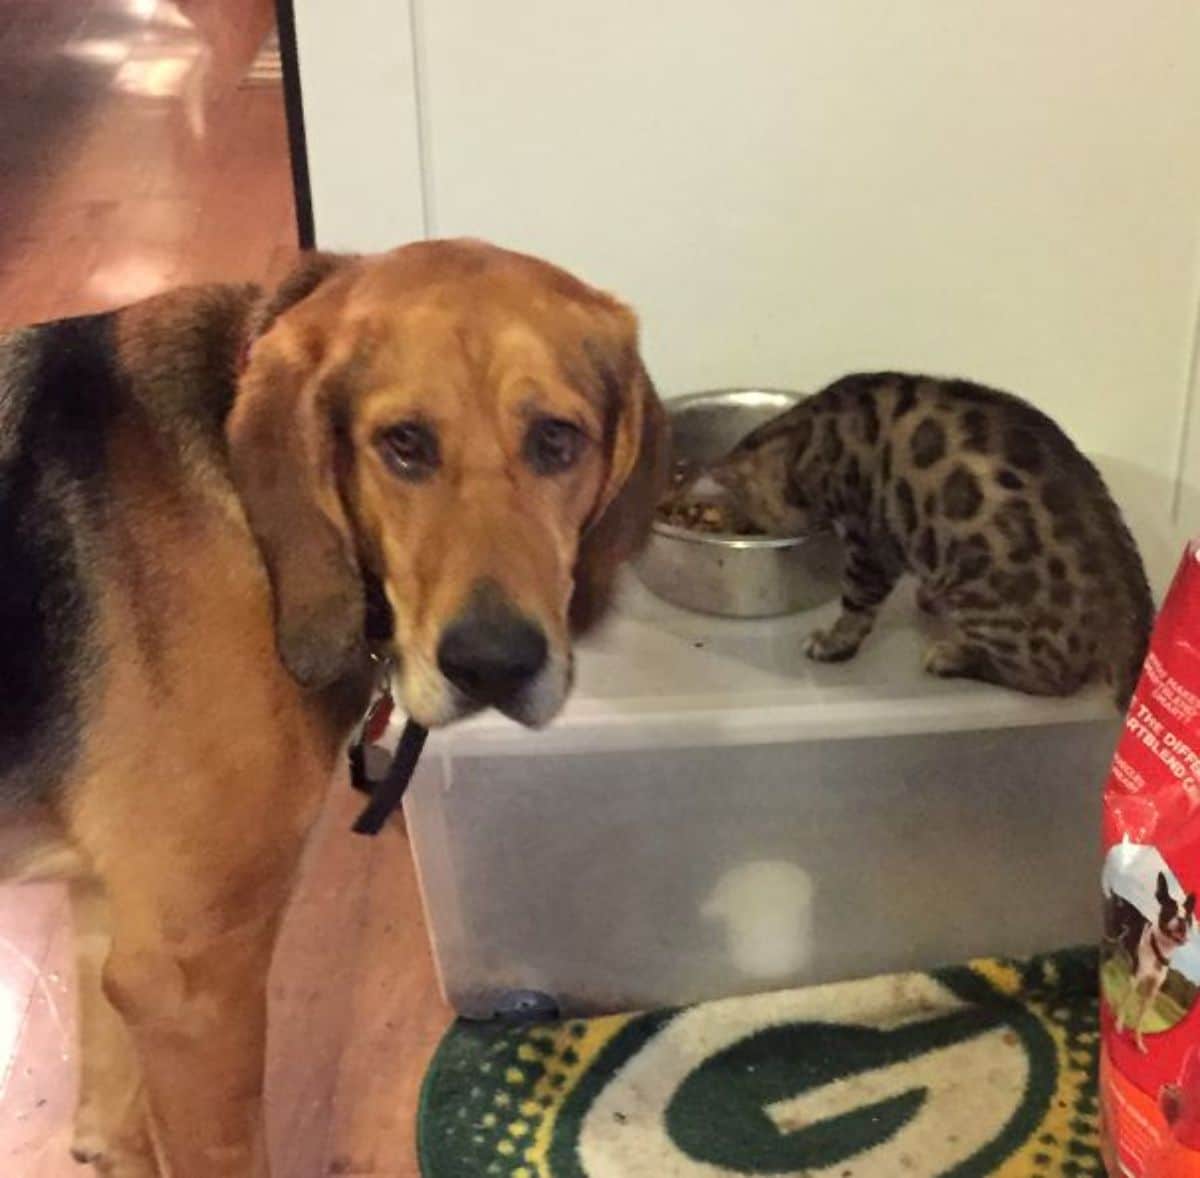 sad brown and black dog looking at the camera while a bengal cat eats out of the dog food bowl